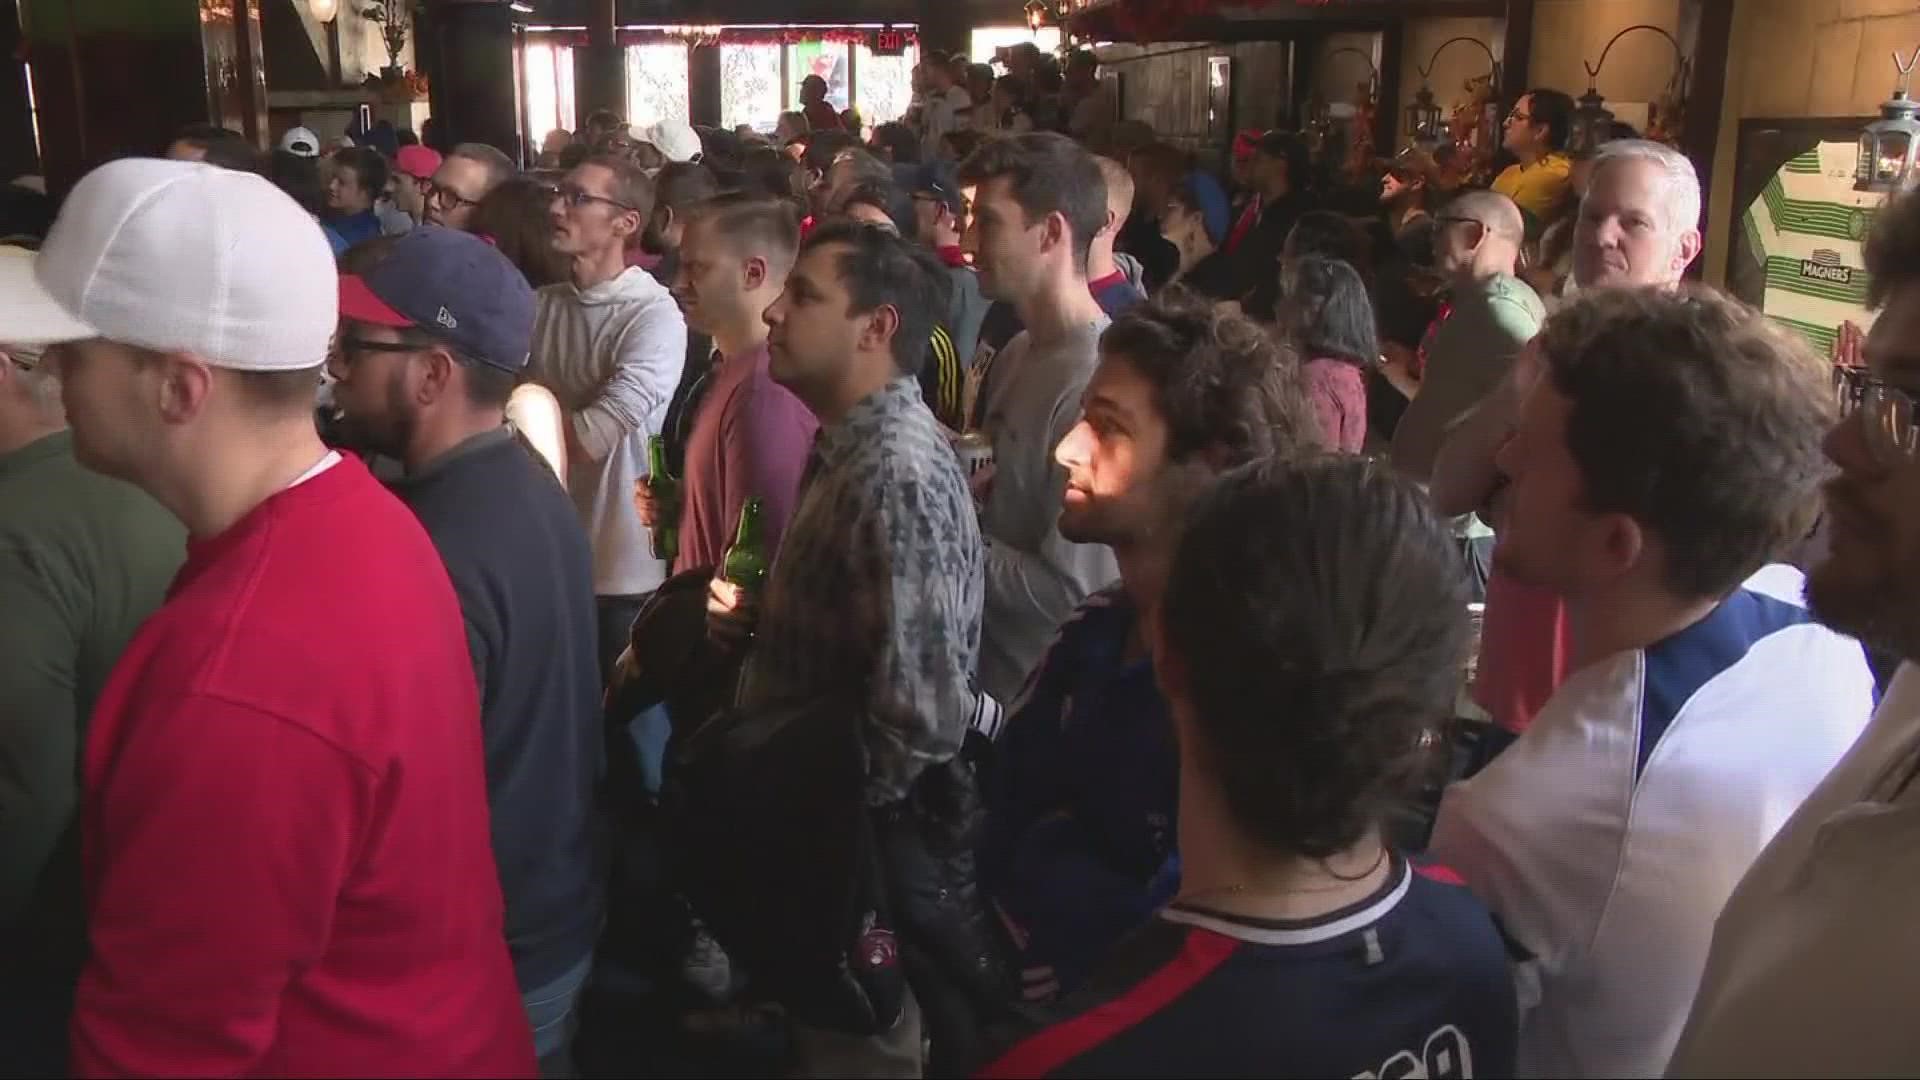 Team USA played England to a scoreless draw at the World Cup on Friday. Neil Fischer was on hand at a local restaurant to watch the match with fans.